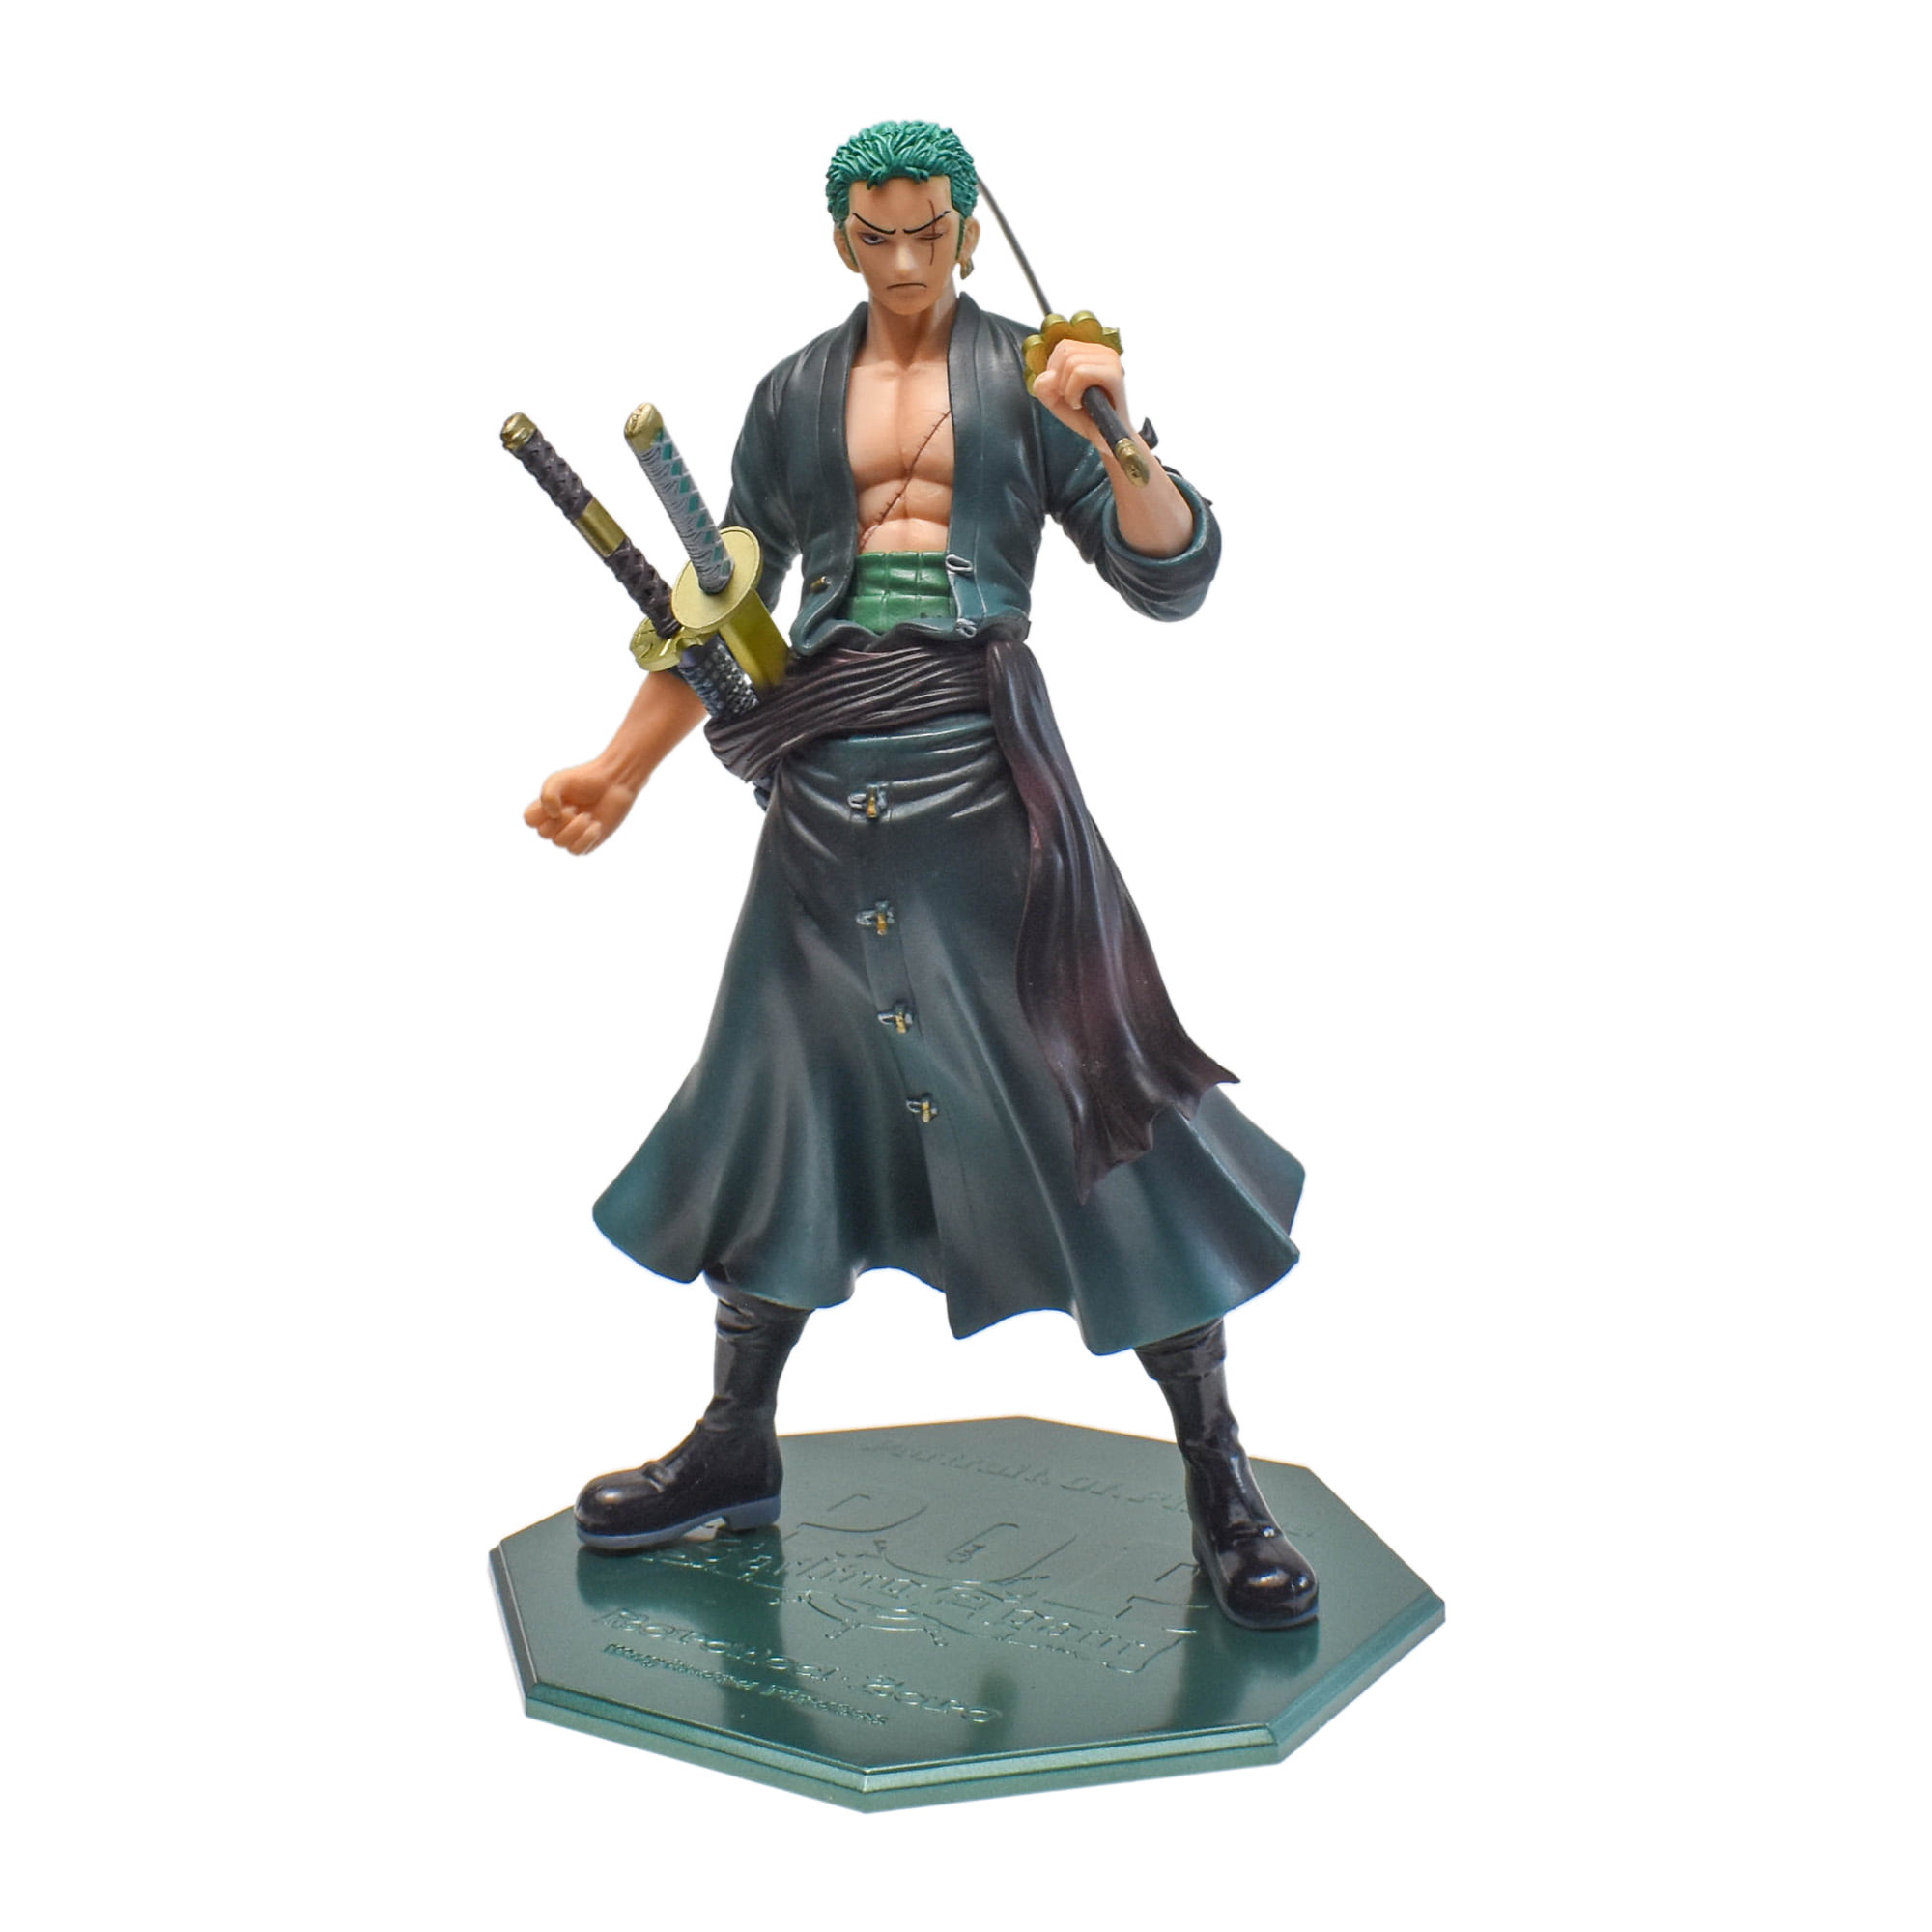 QWEIAS One Piece Roronoa Zoro Action Figure Anime Statues Action Character Model Toy Dolls Desktop Decorations Collectibles Home Car Dashboard Gift Games Cool Green-18CM